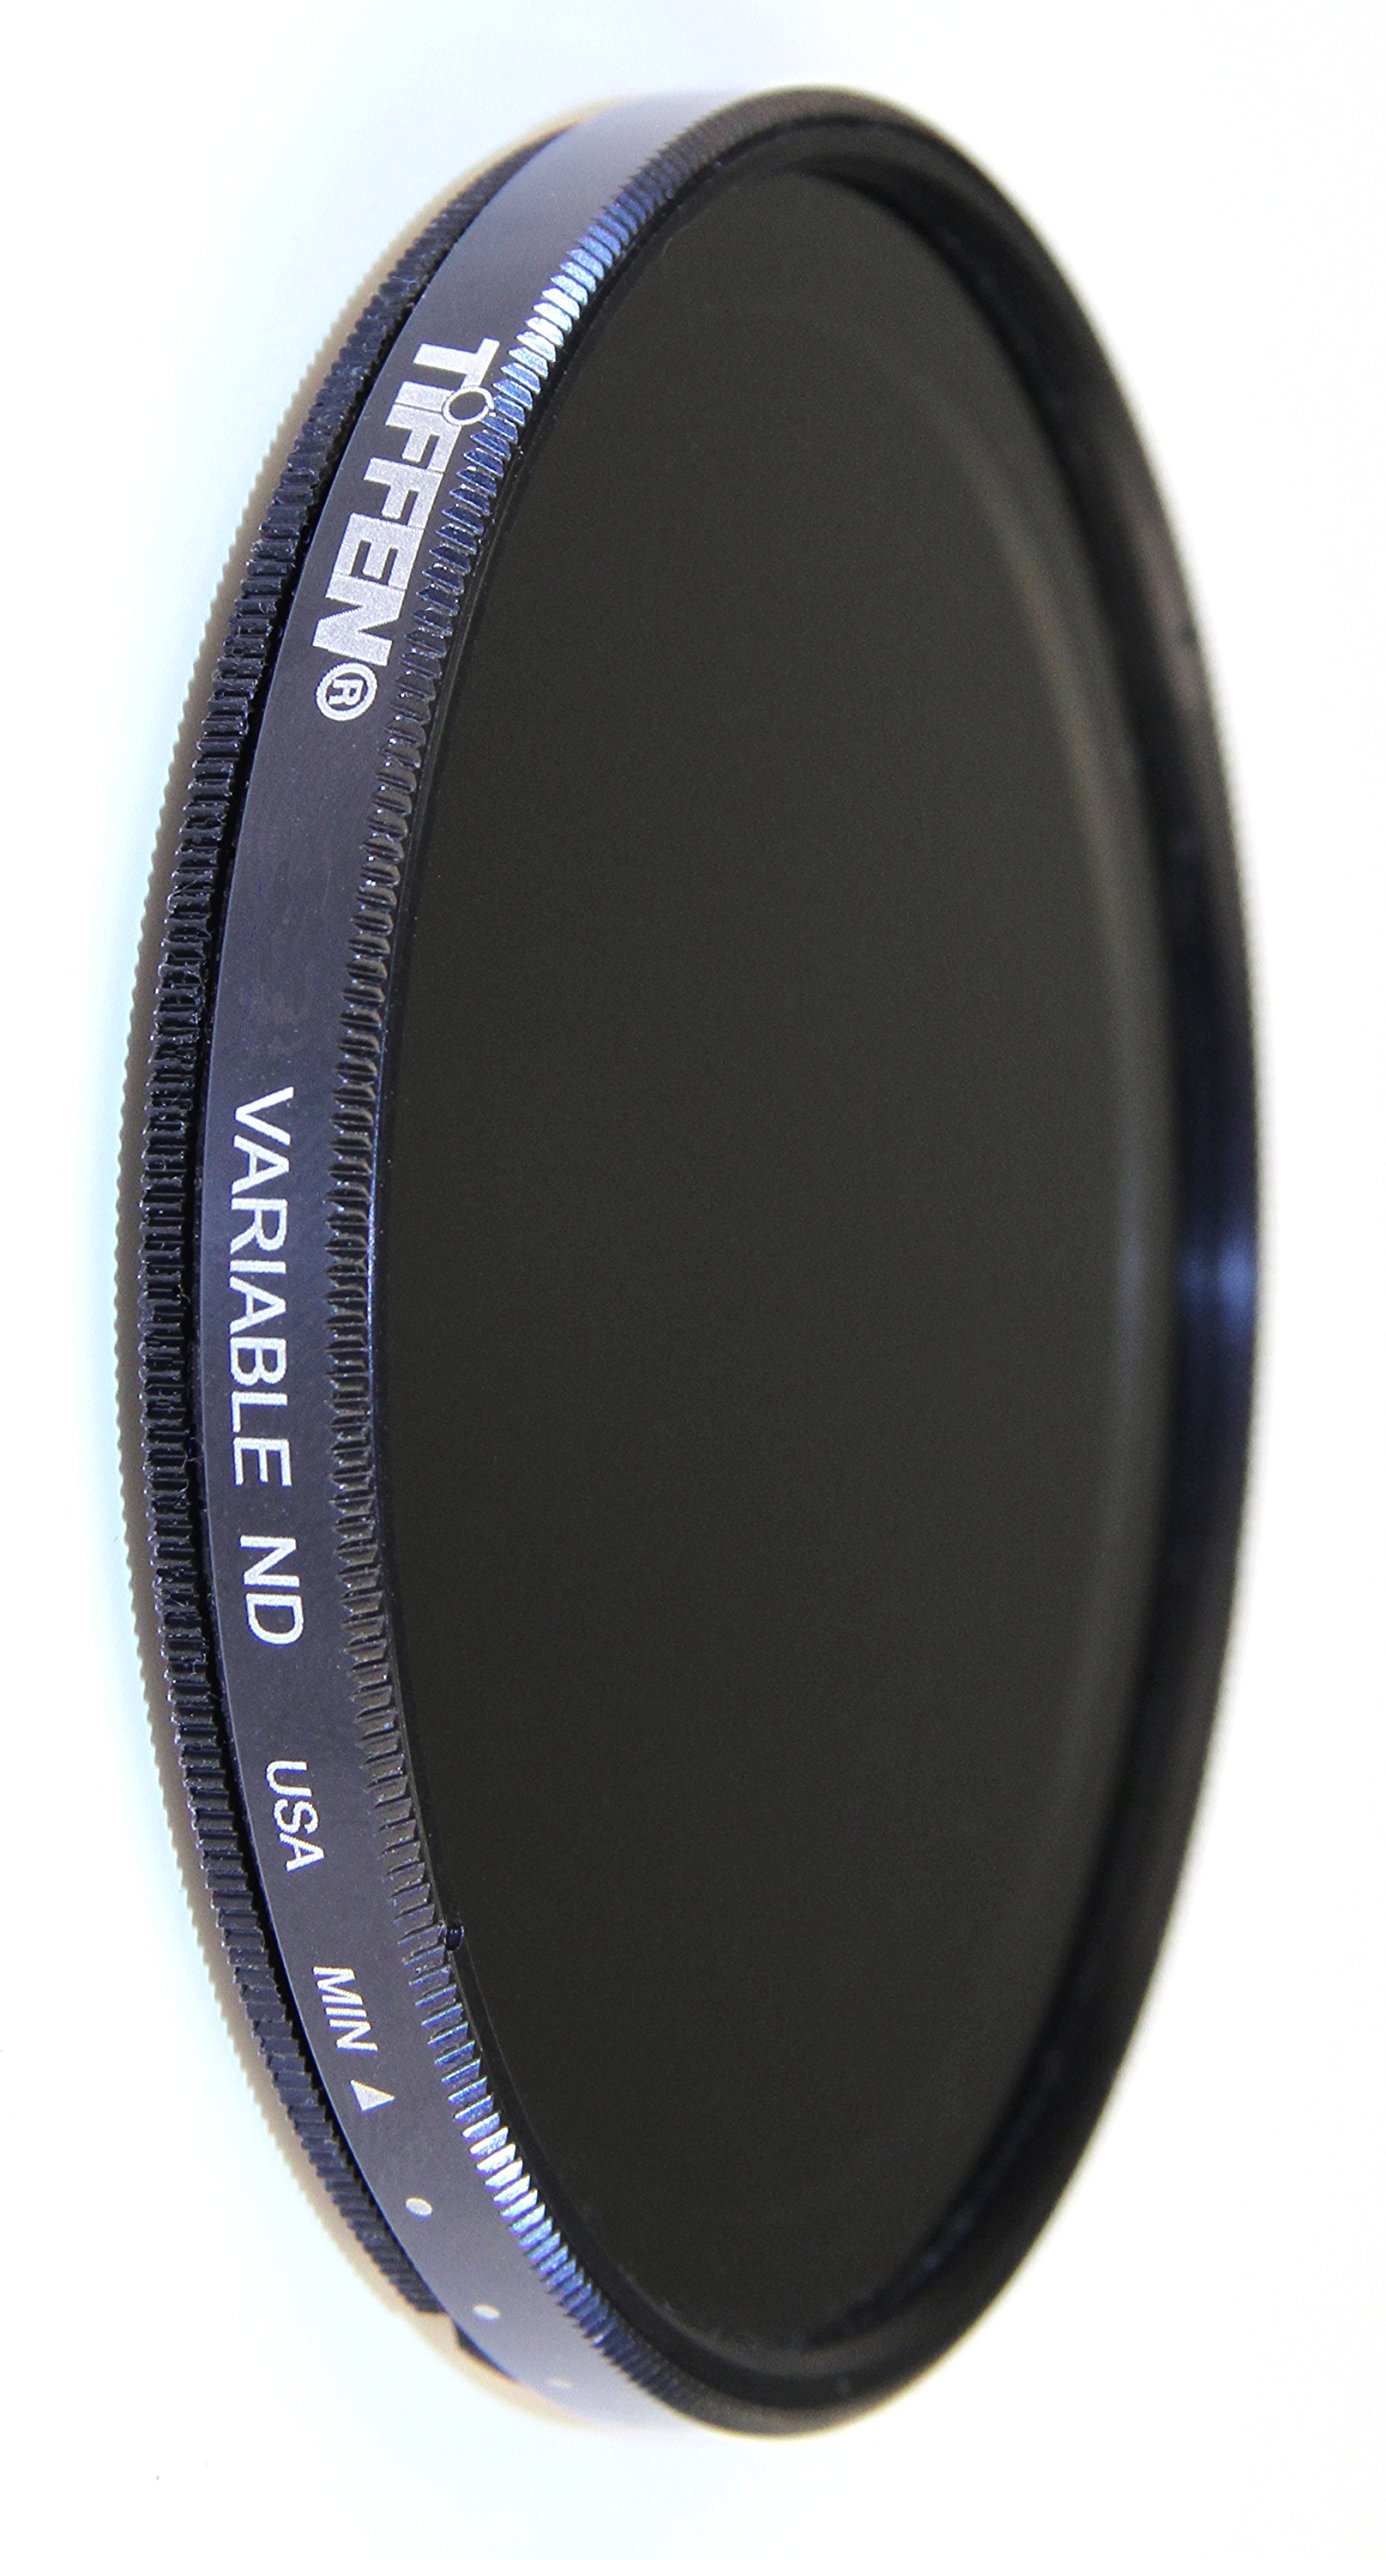 Tiffen 52VND 52mm Variable ND Filter